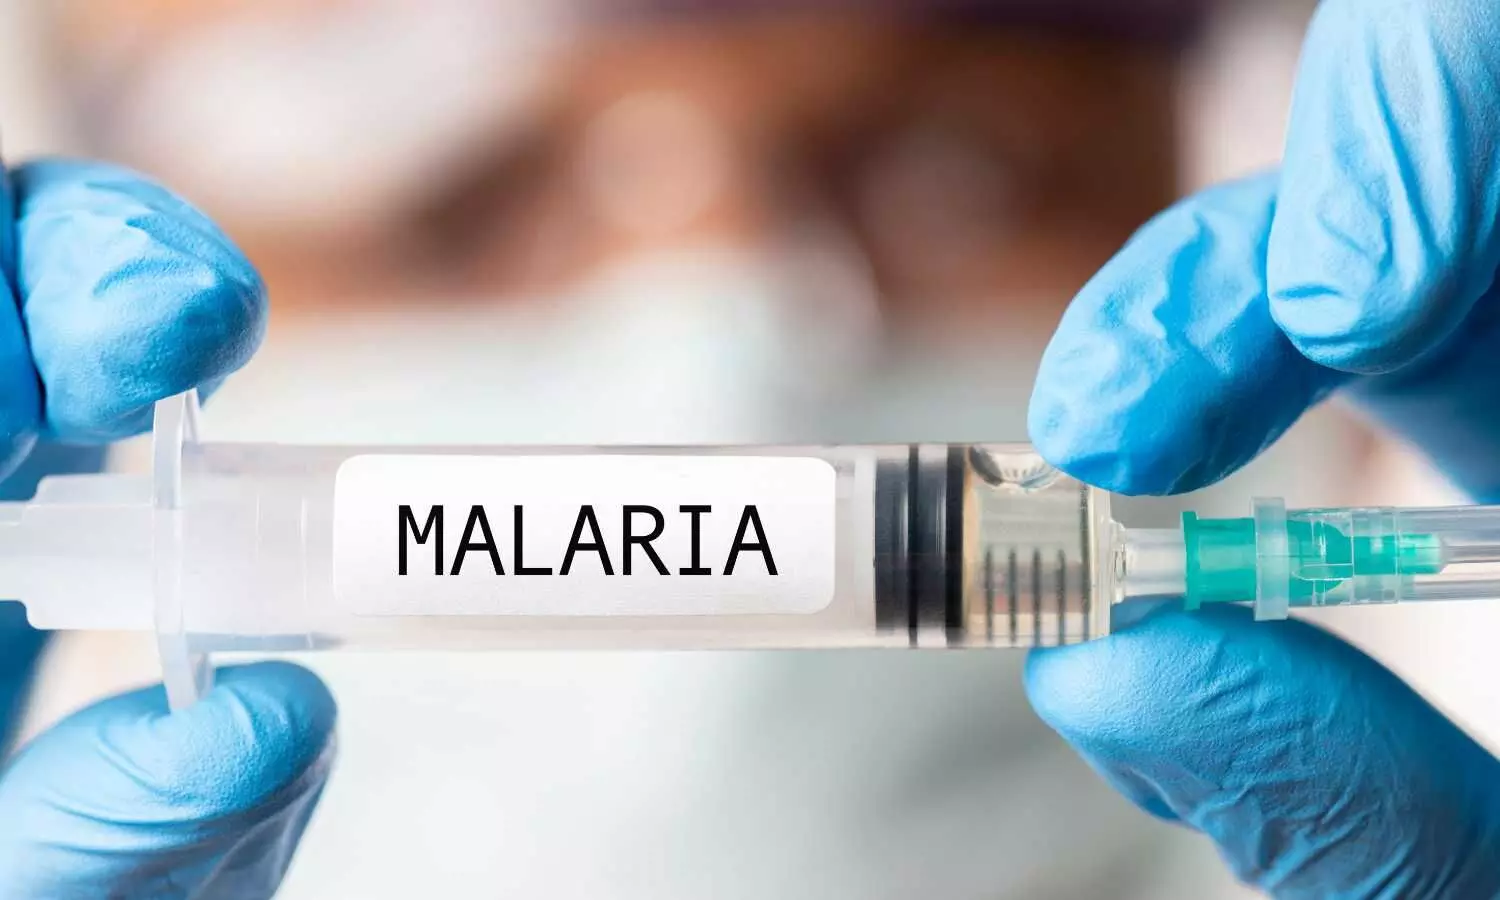 University of Oxford Malaria vaccine gets regulatory clearance for use in Ghana